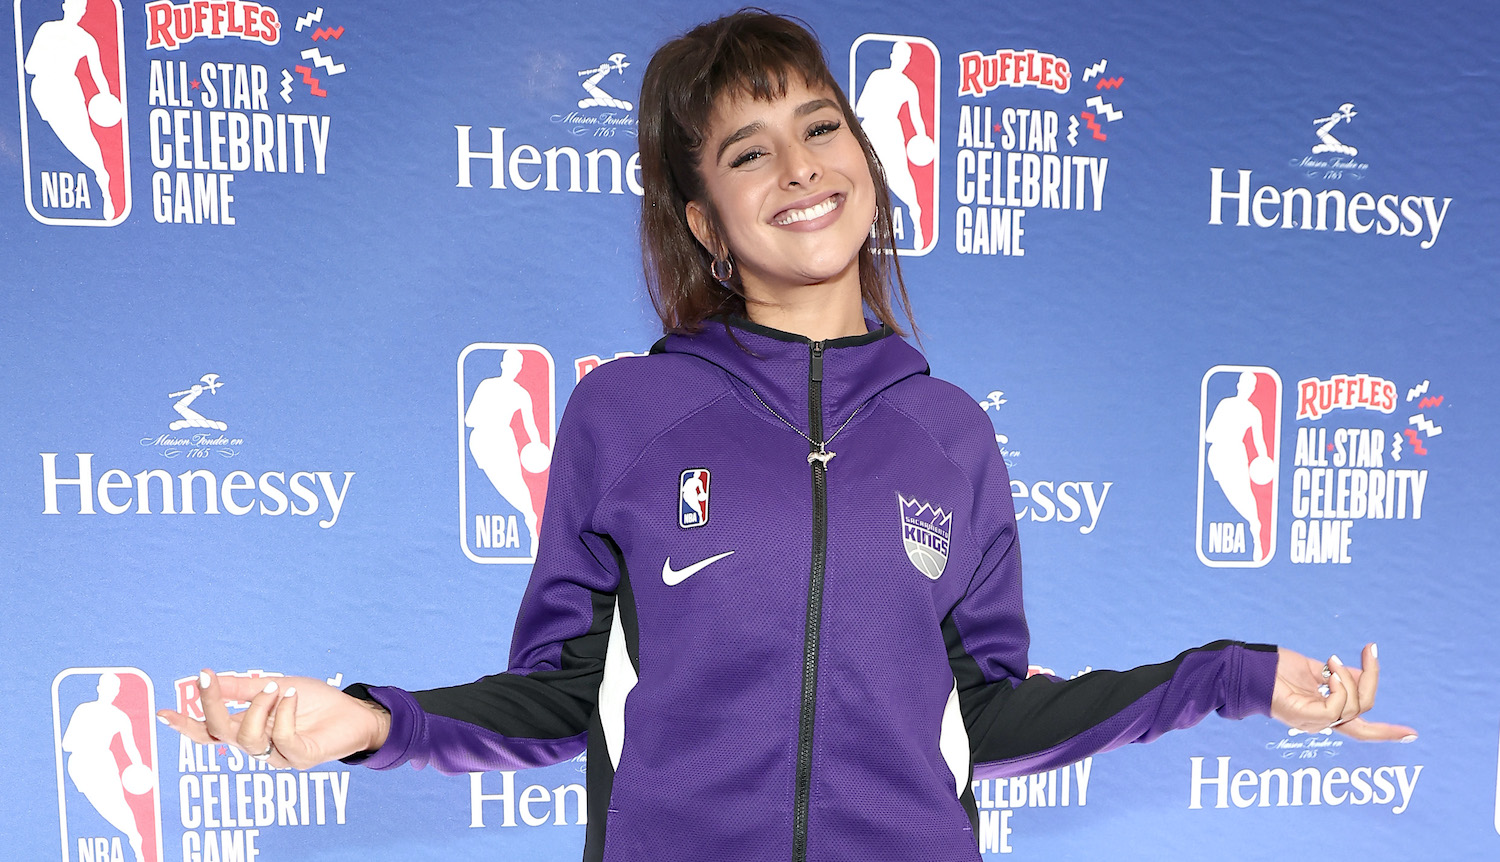 Anjali Ranadive attends the Ruffles NBA All-Star Celebrity Game during the 2022 NBA All-Star Weekend at Wolstein Center on February 18, 2022 in Cleveland, Ohio. (Photo by Arturo Holmes/Getty Images)